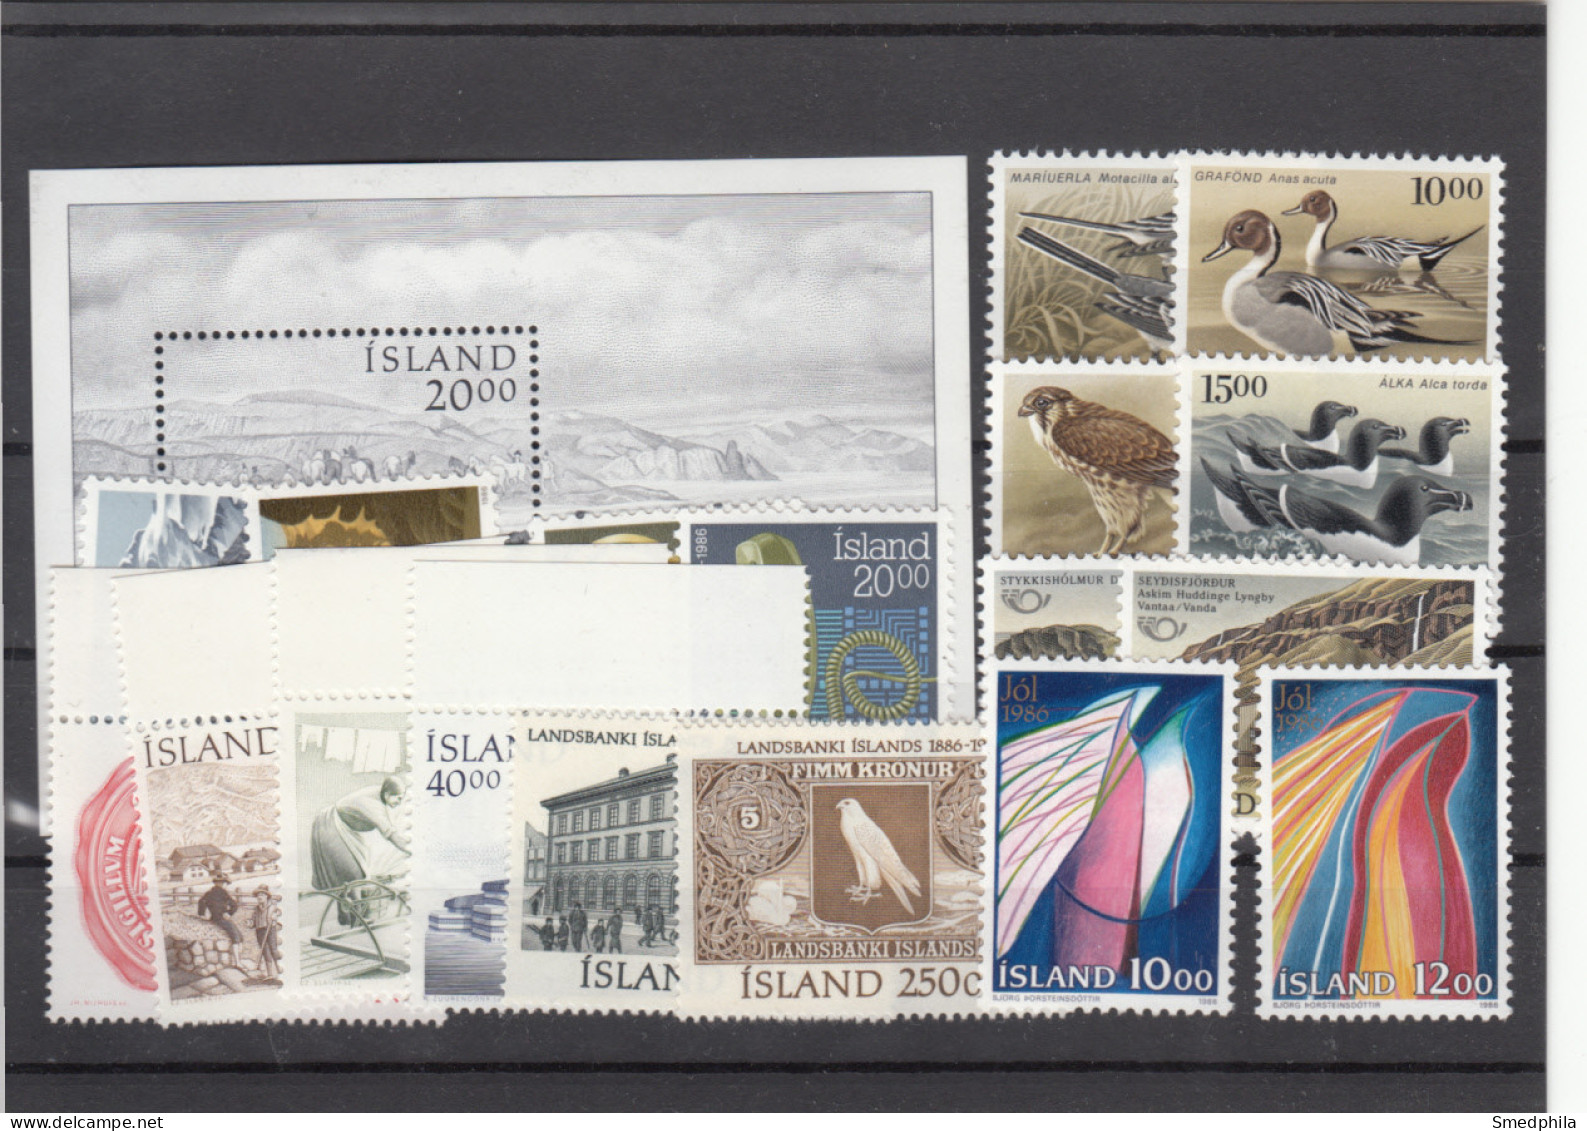 Iceland 1986 - Full Year MNH ** - Années Complètes